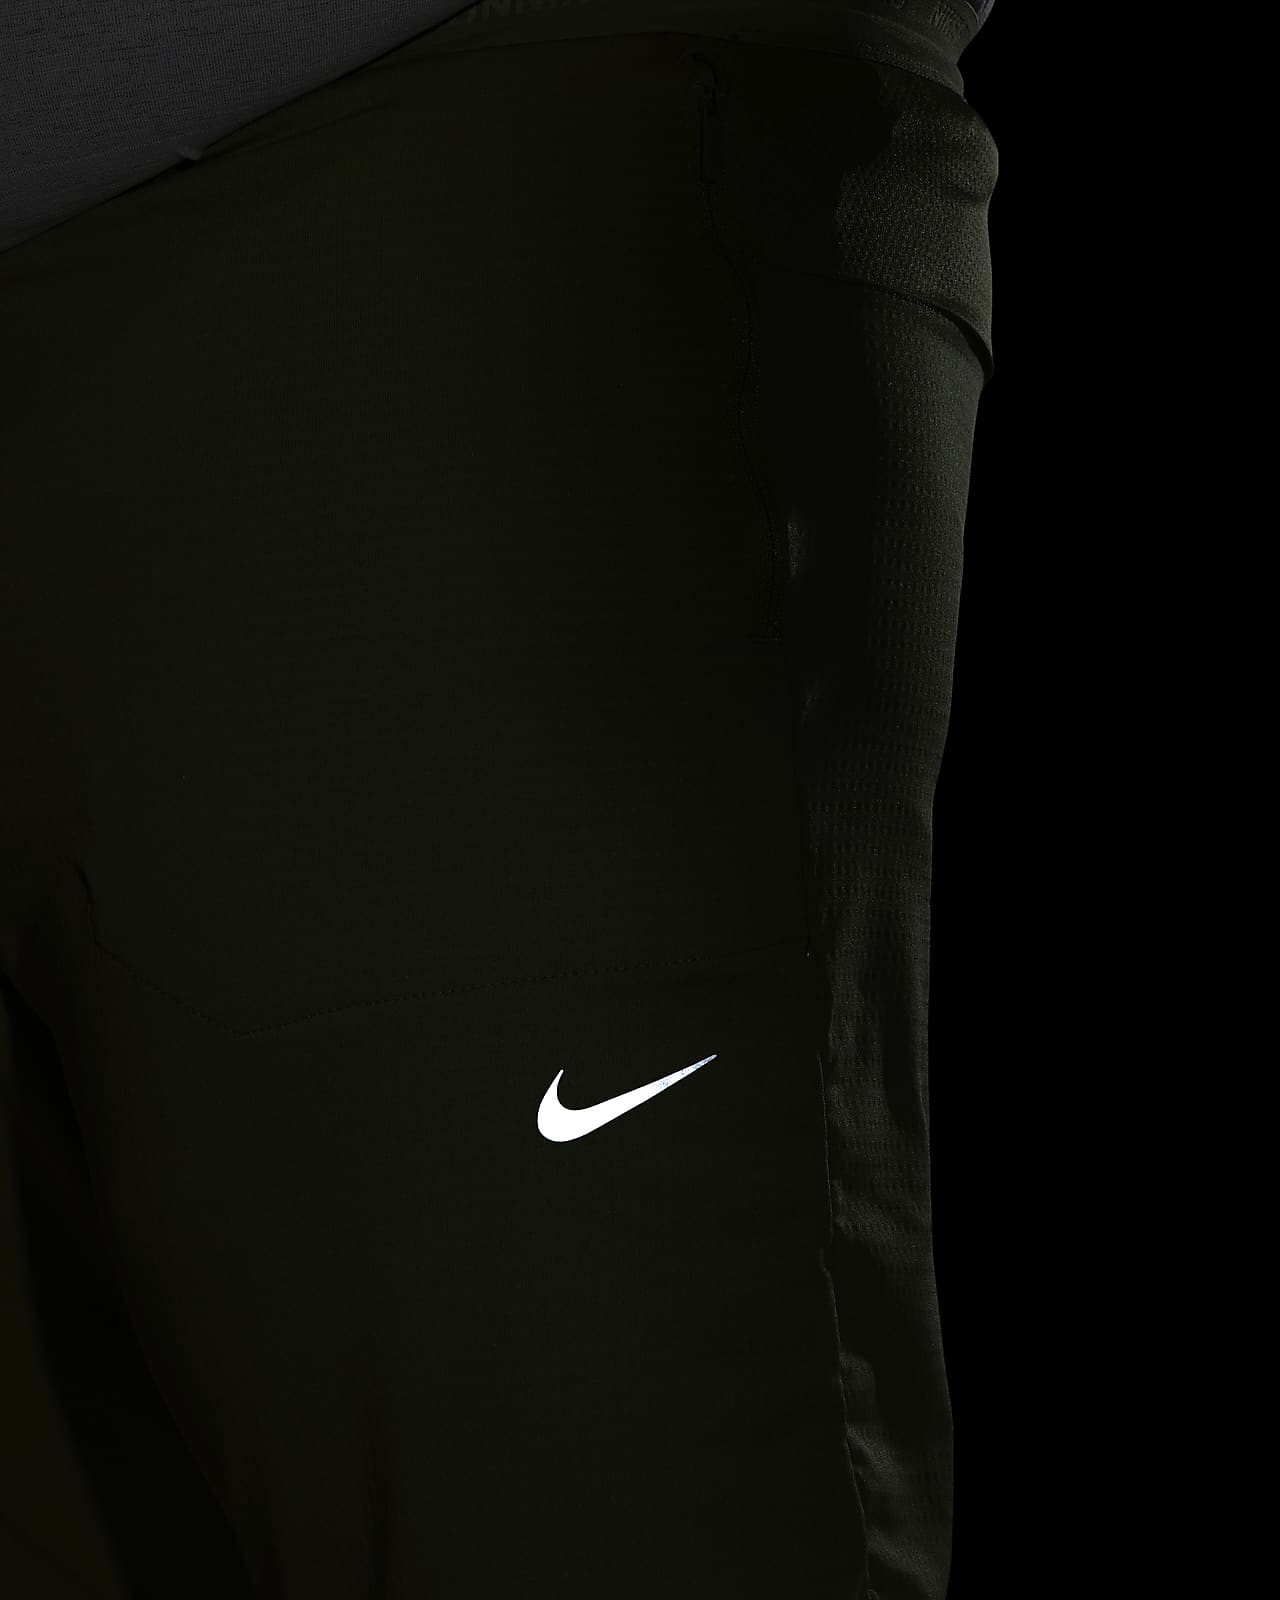 Nike Phenom Mend Hybrid Running Trousers Pants Brand New With Tags